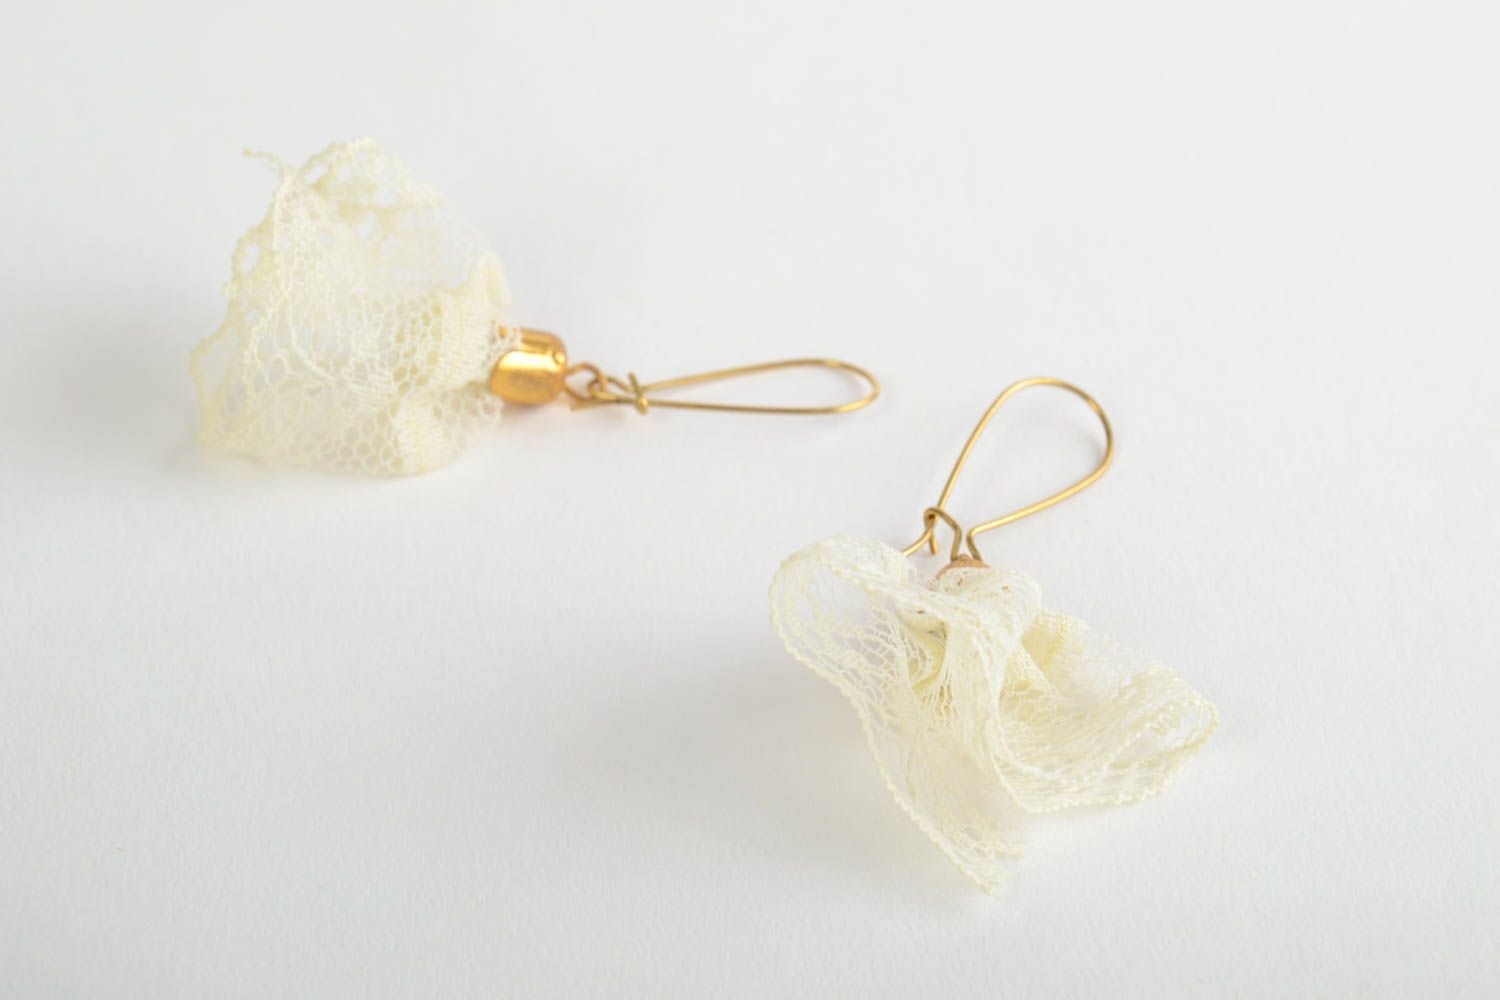 Handmade light festive lace dangling earrings with golden colored ear wires photo 3